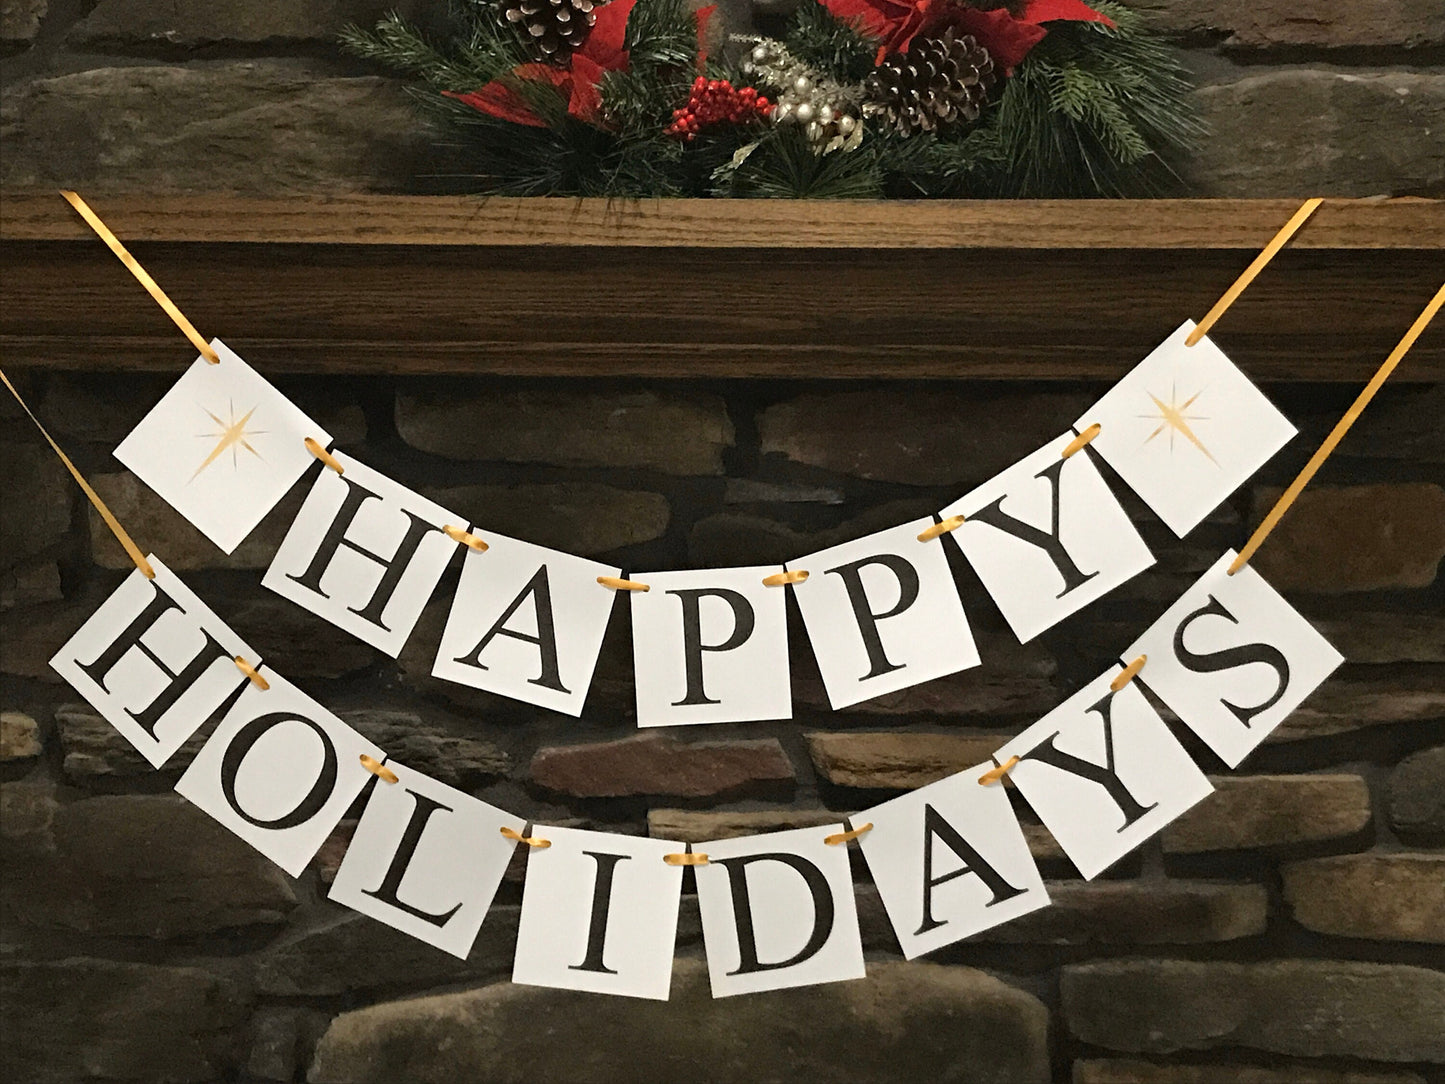 Happy Holidays Banner, Gold North Star Christmas decorations, living room holiday decor, fireplace mantel bunting, Merry Christmas garland